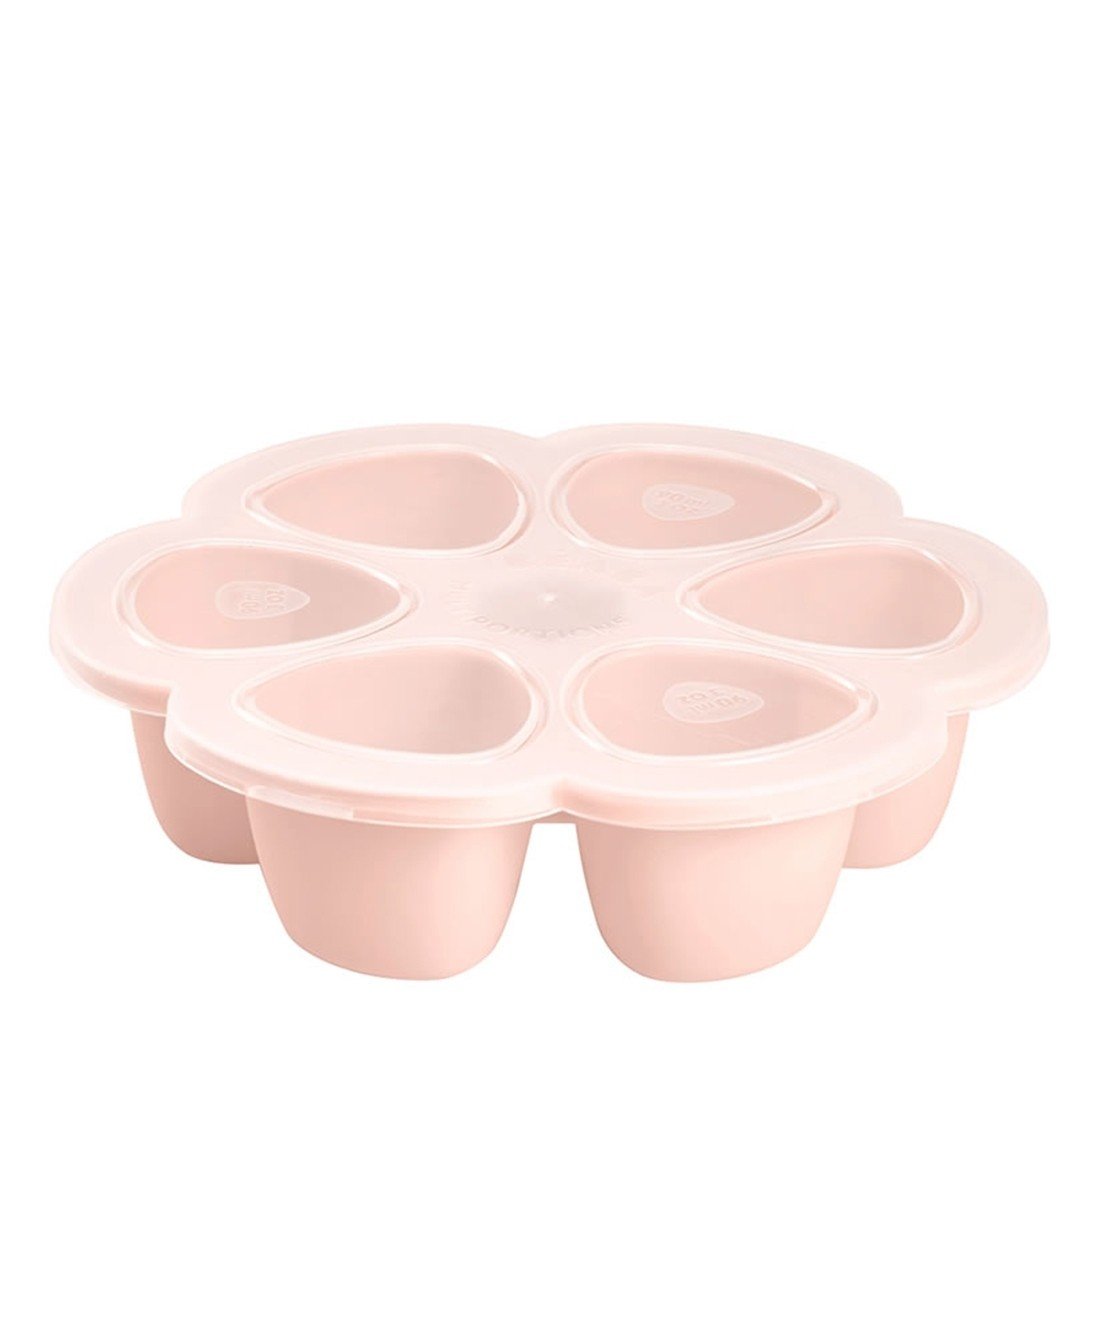 Beaba Multiportions™ 6x90ml Silicone Tray